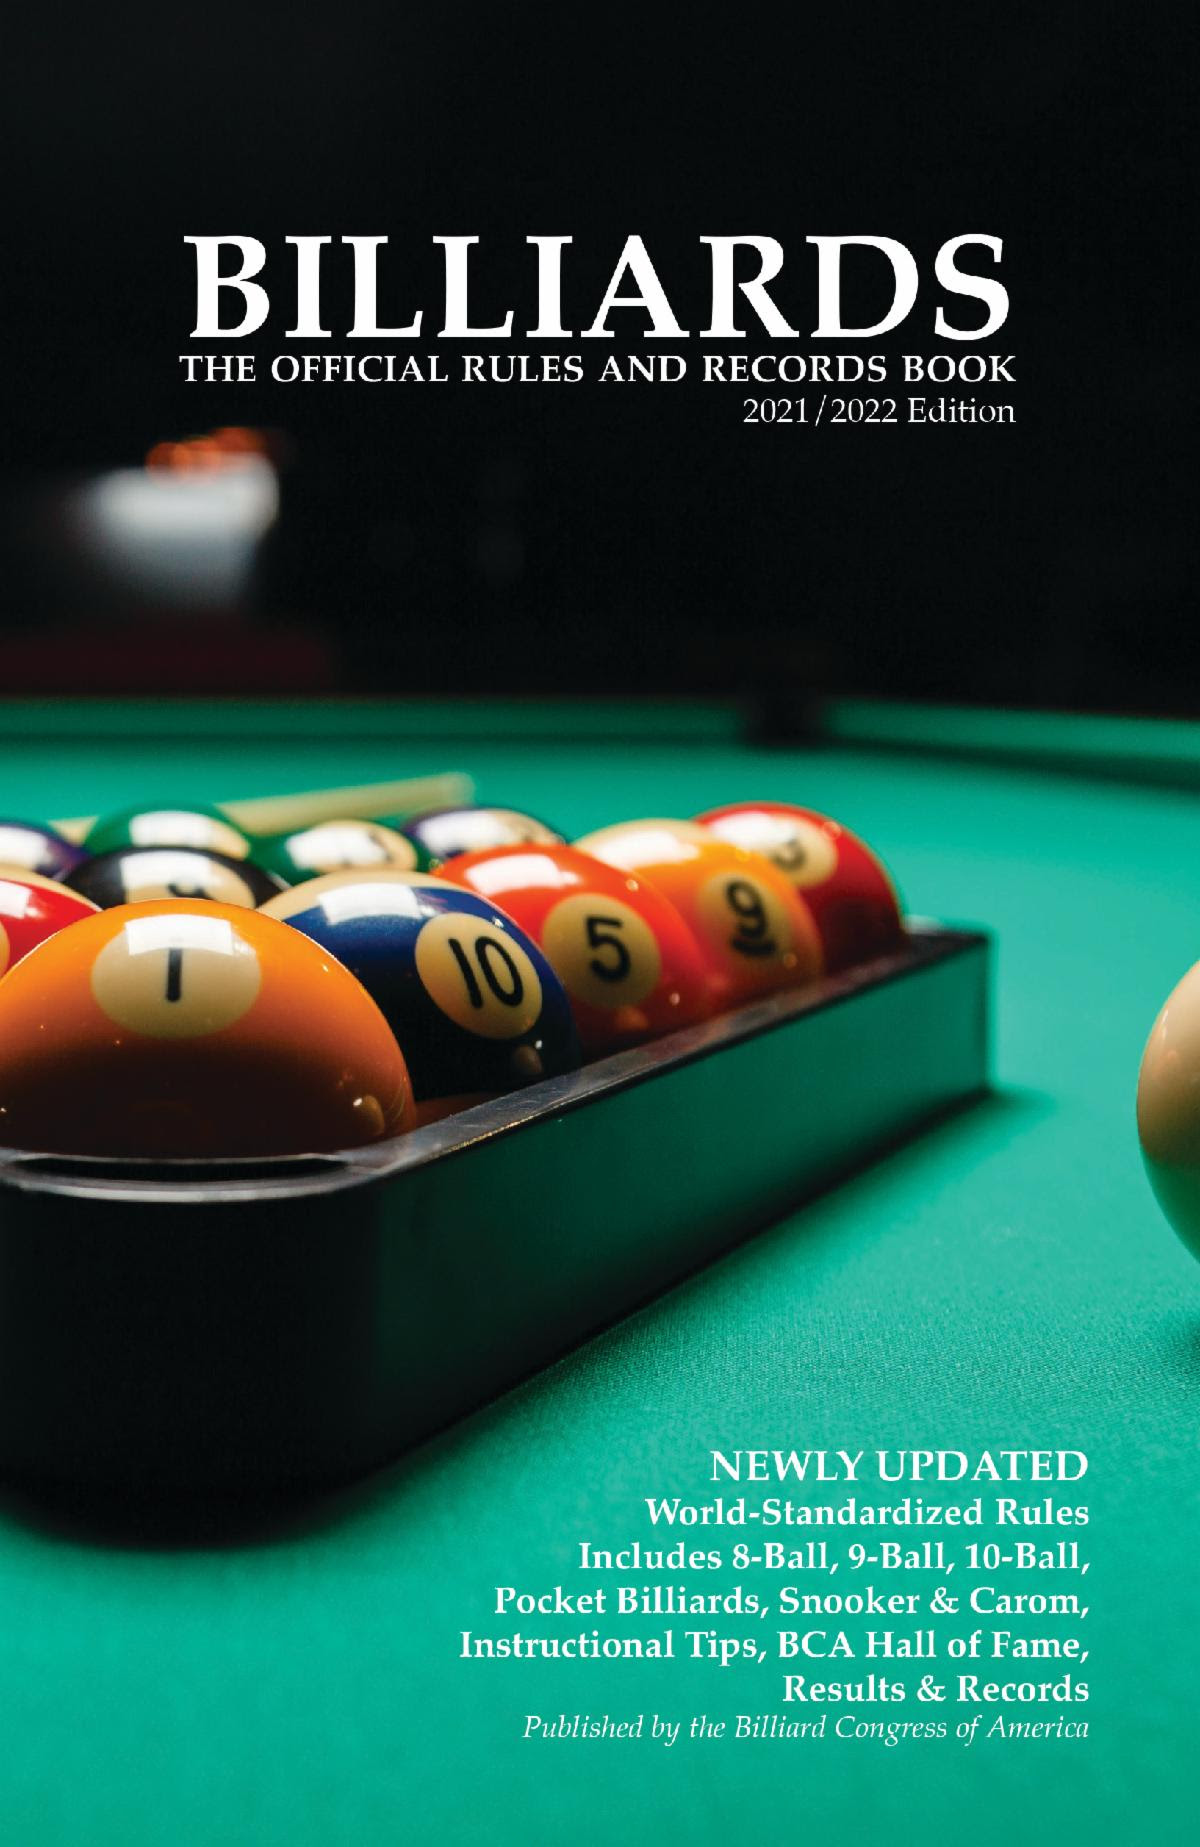 Standardized Rules for 8-Ball